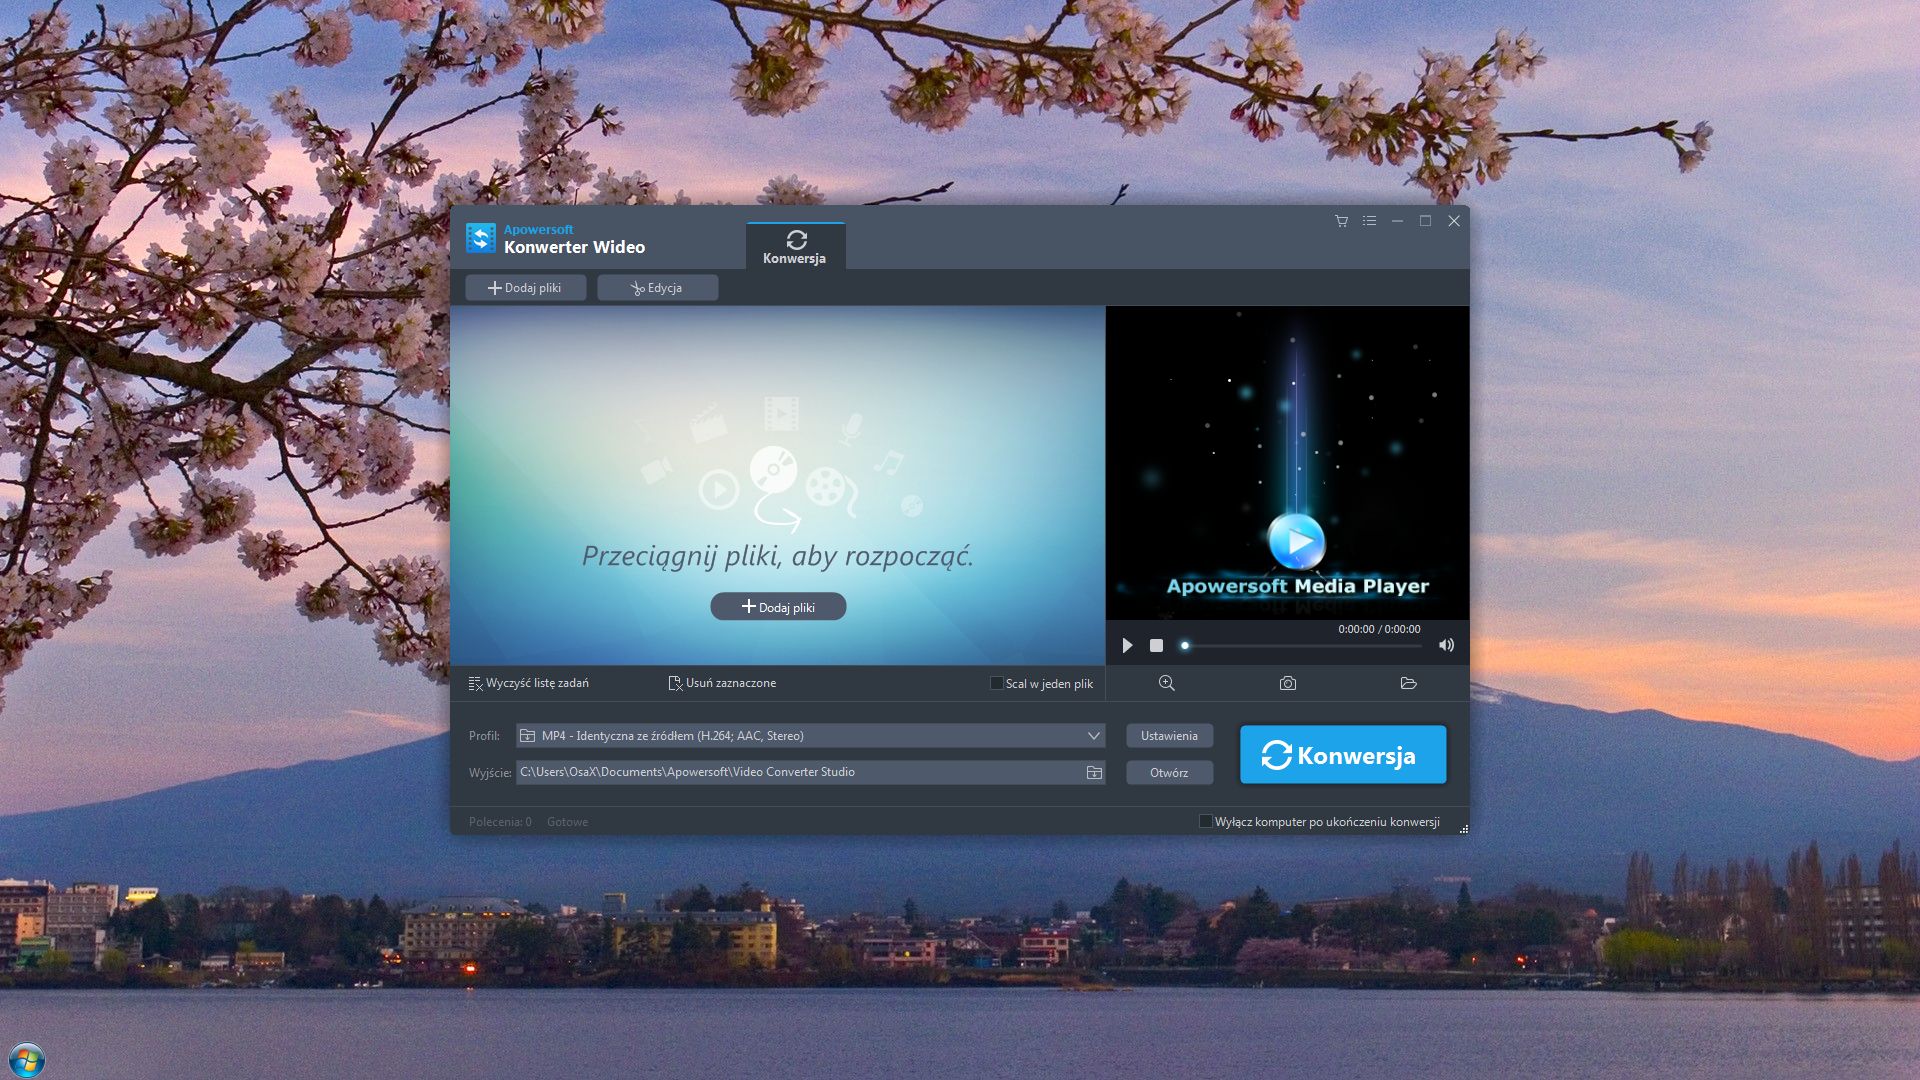 download the new Apowersoft Video Converter Studio 4.8.9.0